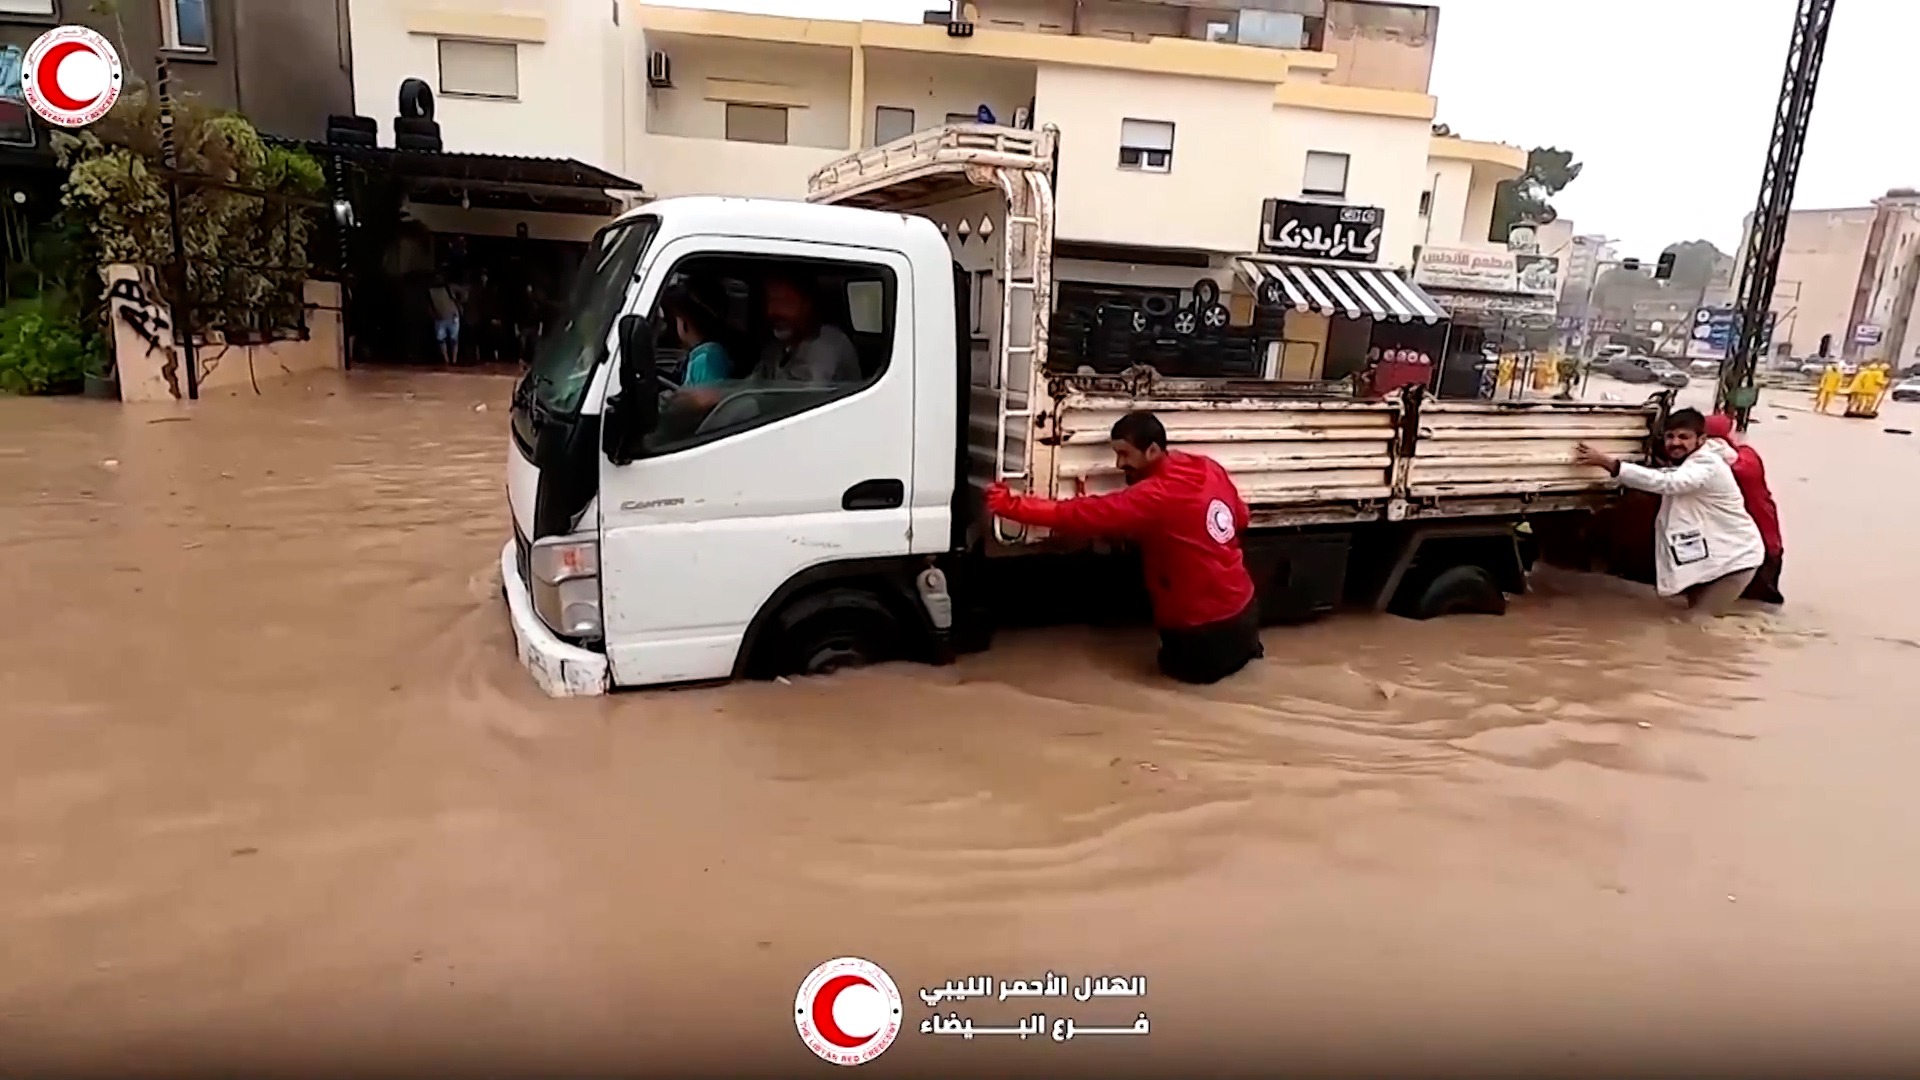 Red Crescent workers helping motorists through flooded streets. The Red Crescent workers push a small builders truck through brown floodwater that almost covers the vehicle’s tyres